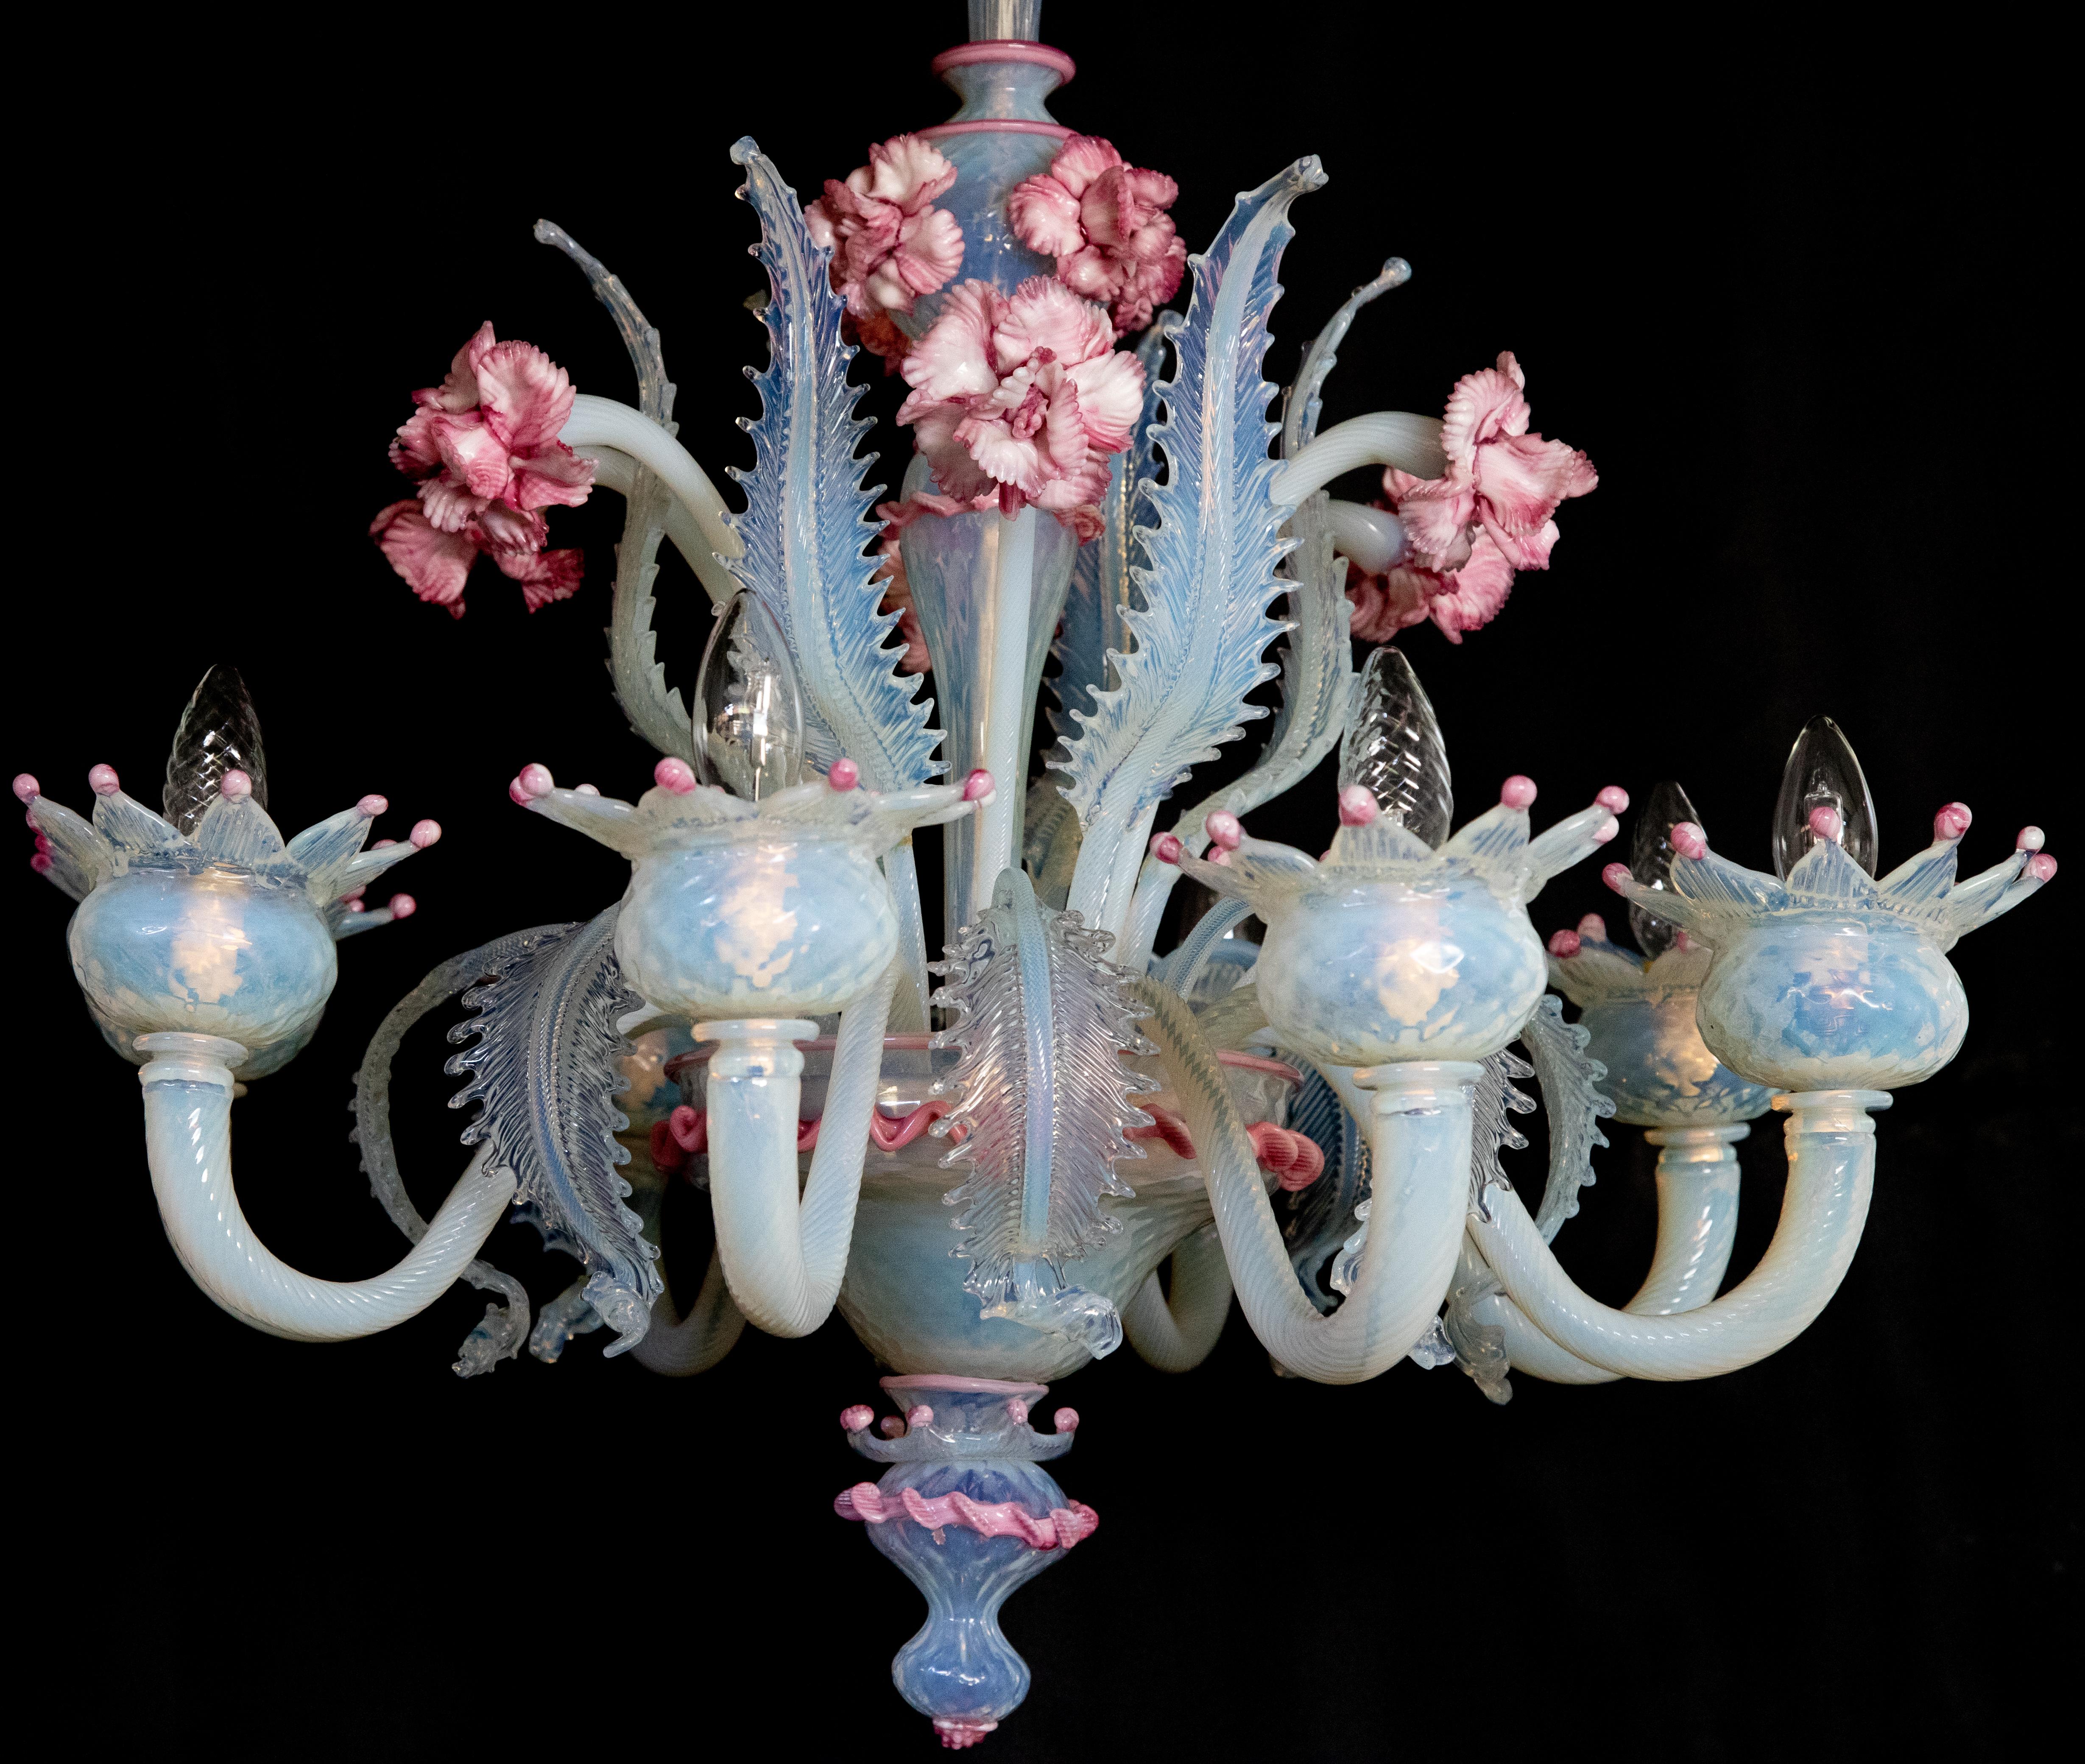 Murano chandelier of awesome beauty. Lights (8) flowers and leaves in pure Murano glass paste. Each piece is a jewel.